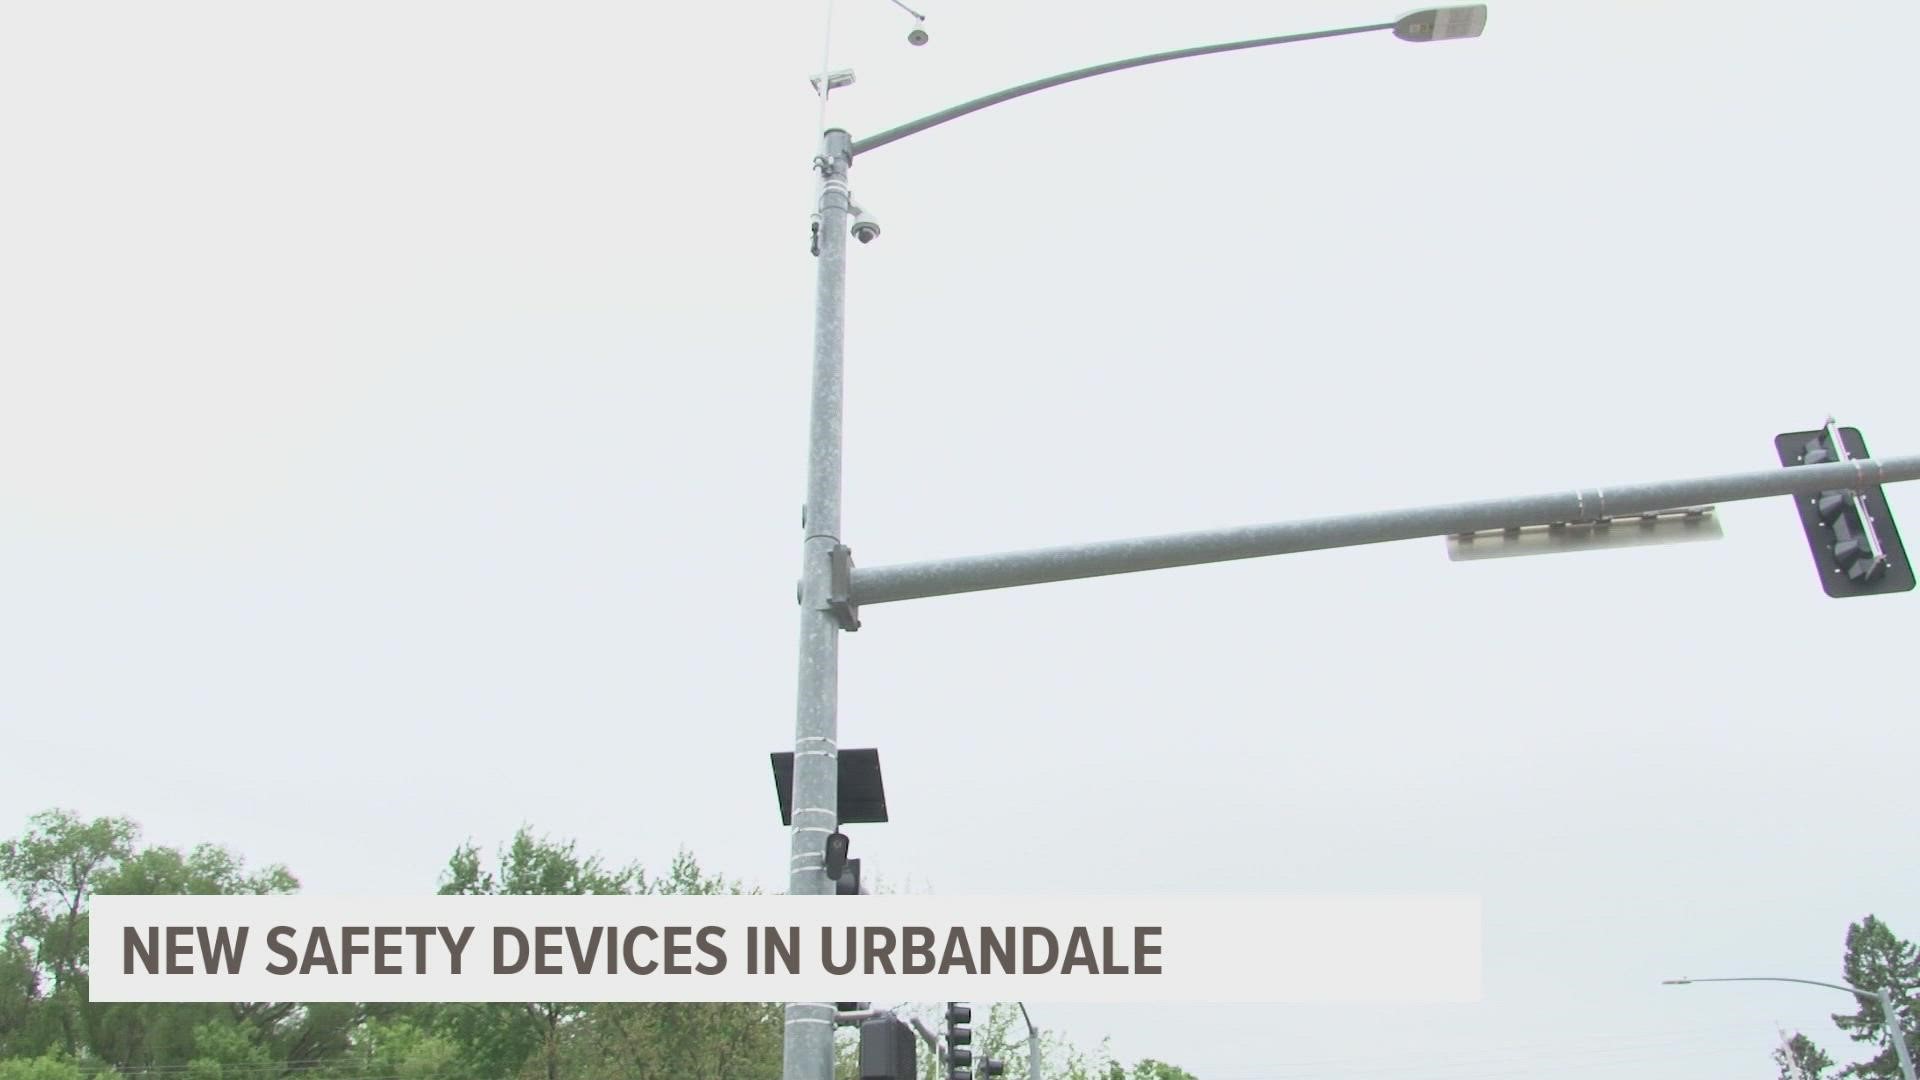 Urbandale now has new safety devices installed at certain intersections aimed at helping cut down on crimes.